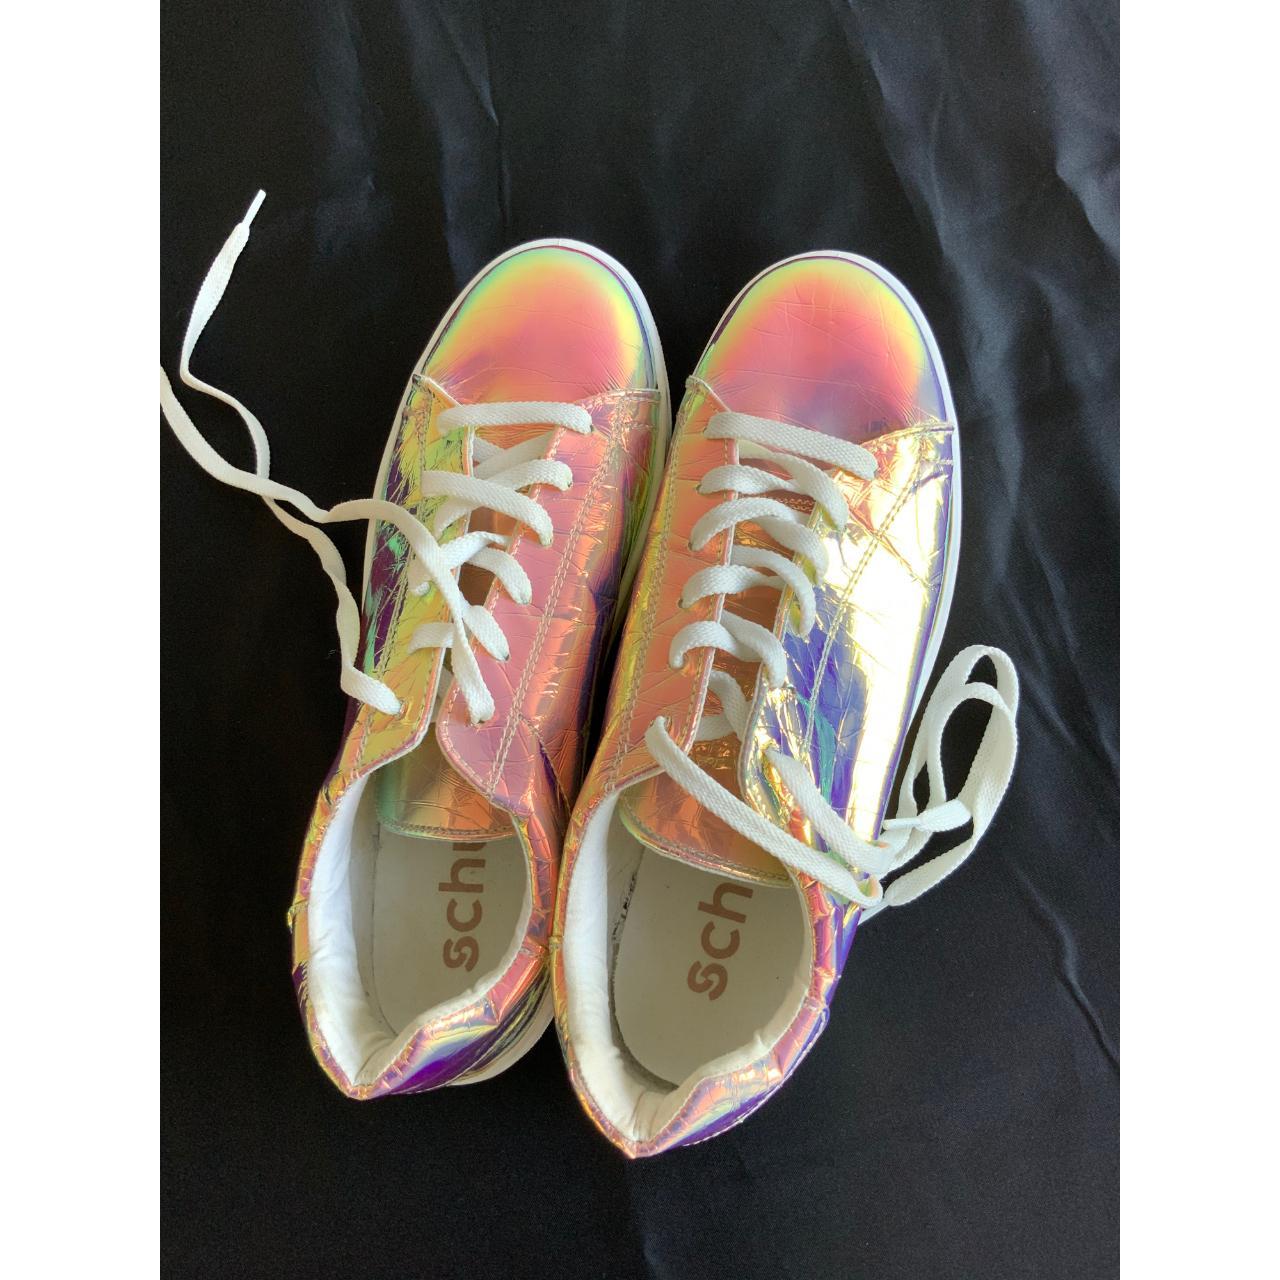 Product Image 3 - Schuh London casual/sneakers

Size: Womens US